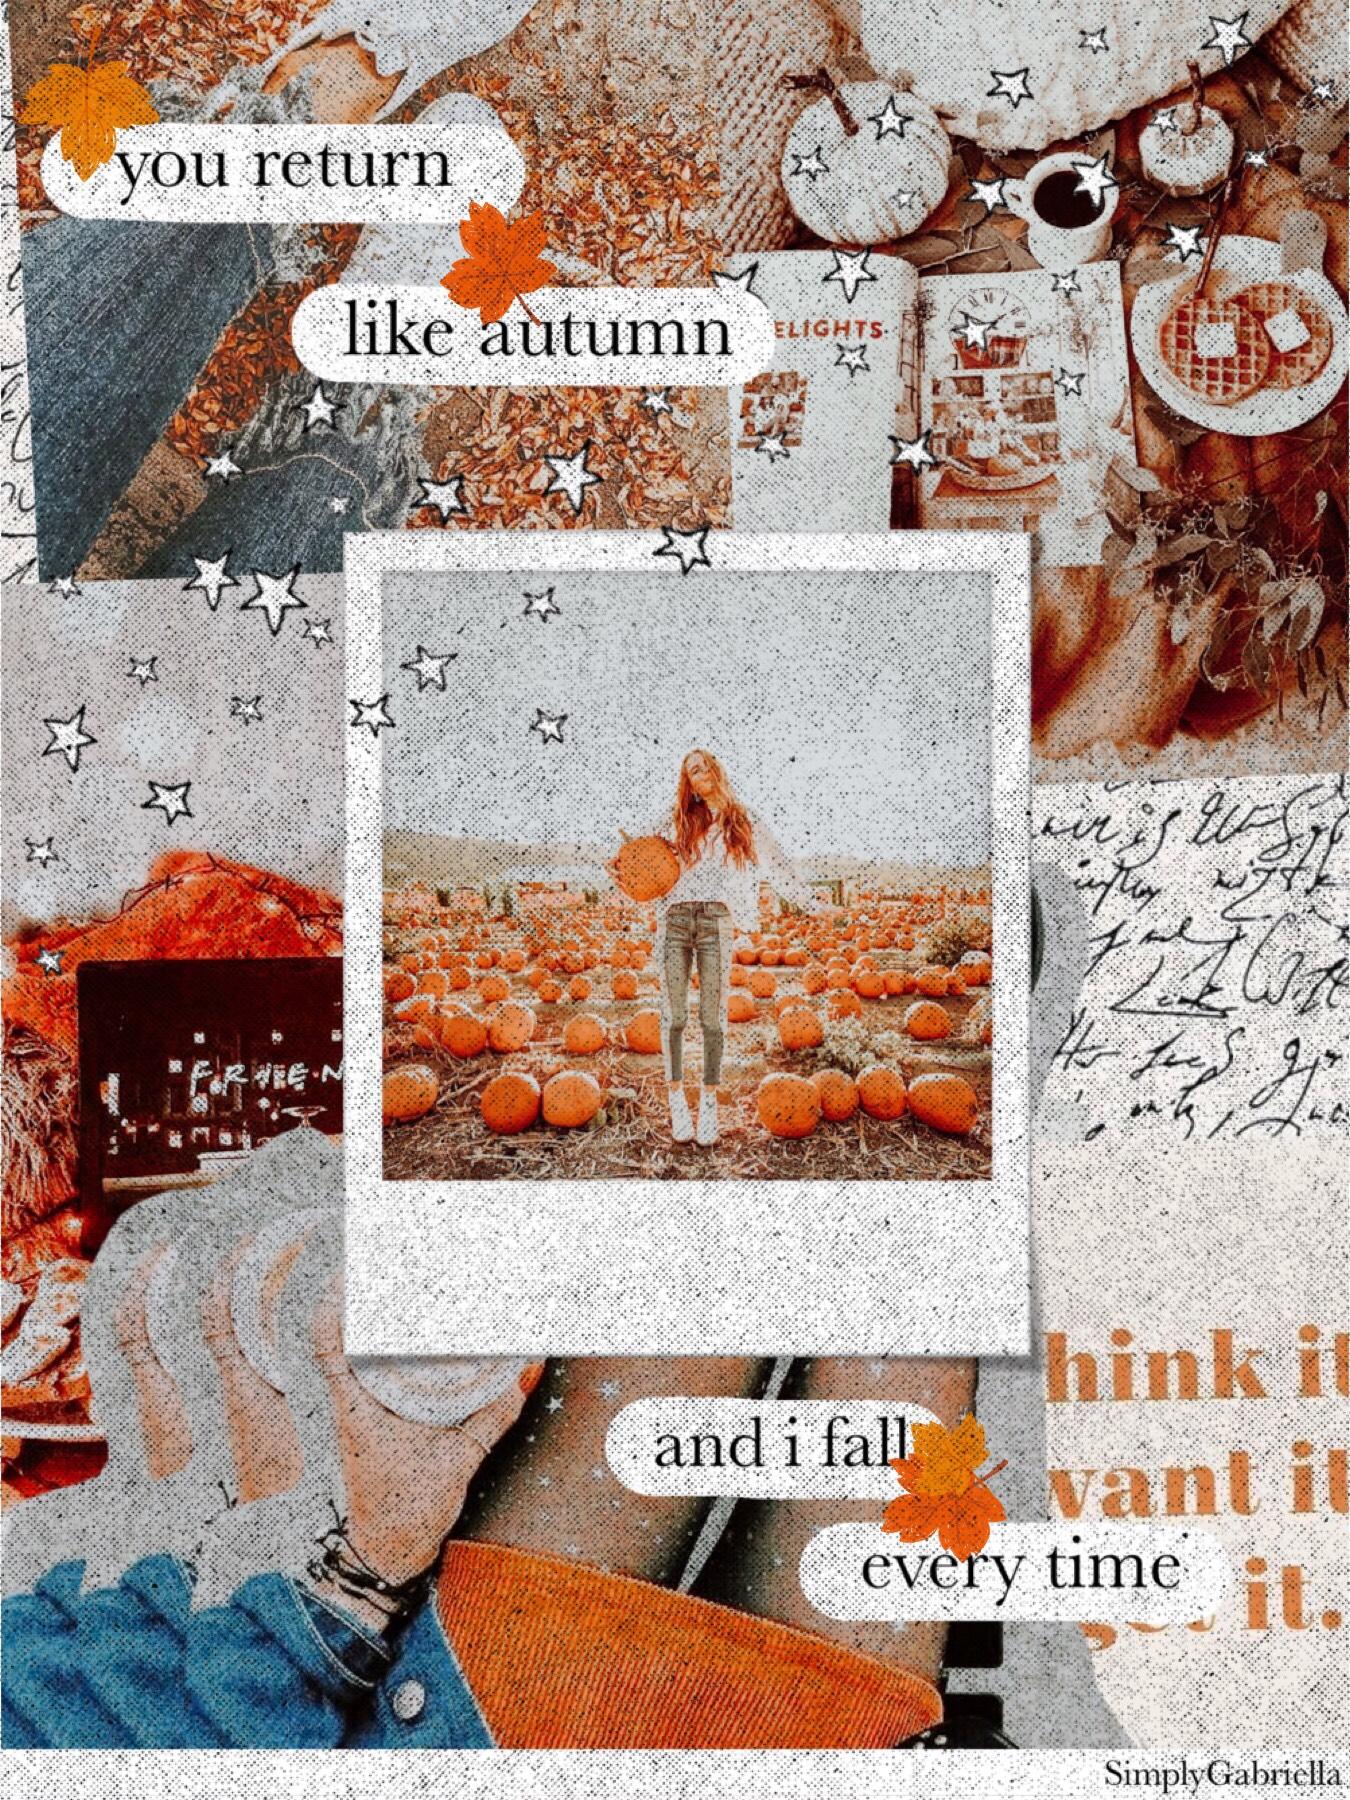 [ t a p ]
hi! 
this was my entry to pc’s fall contest 
i was really feeling some fall vibes today 
what weather is it like where you live rn? it’s 68 degrees and rainy here
#FALLVIBES #PC #MAYBENOT #AESTHETIC
🍁